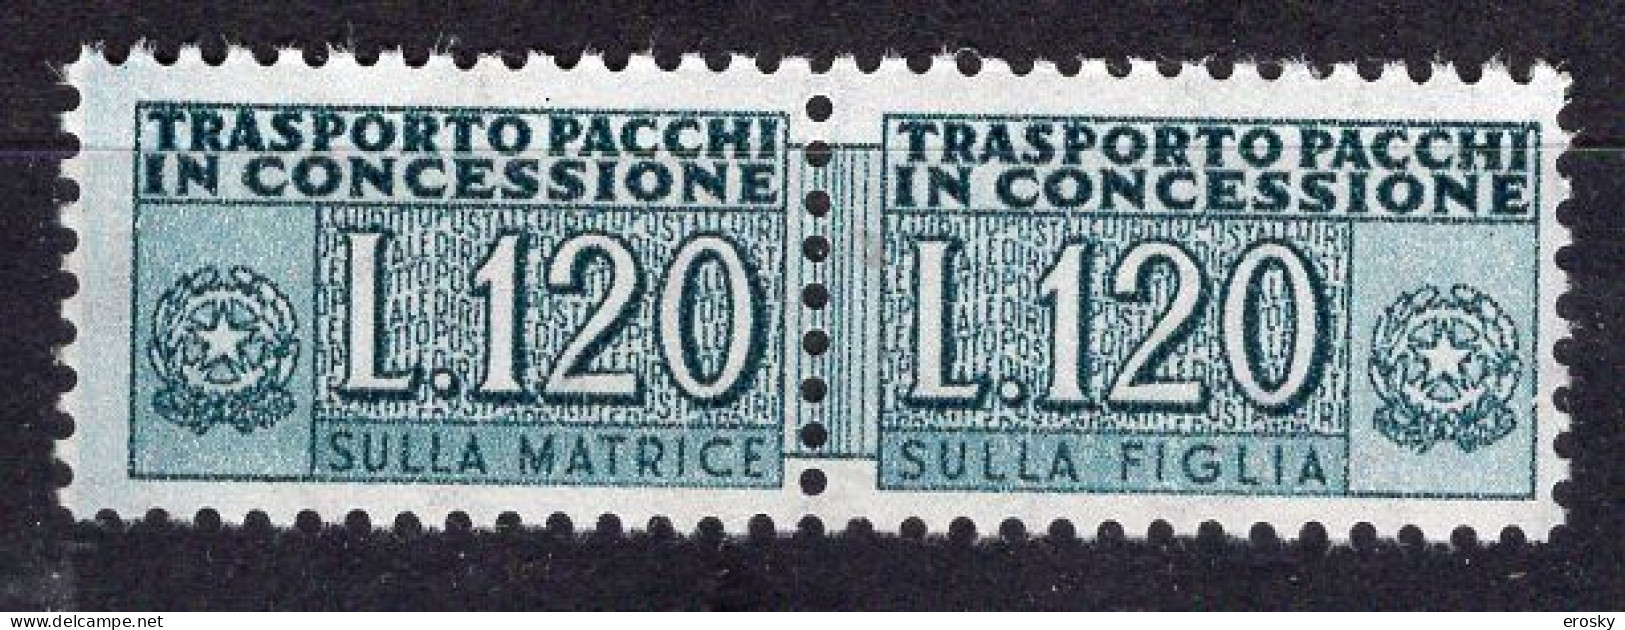 Y6270 - ITALIA PACCHI CONCESSIONE Ss N°14 - ITALIE COLIS Yv N°99 ** - Consigned Parcels